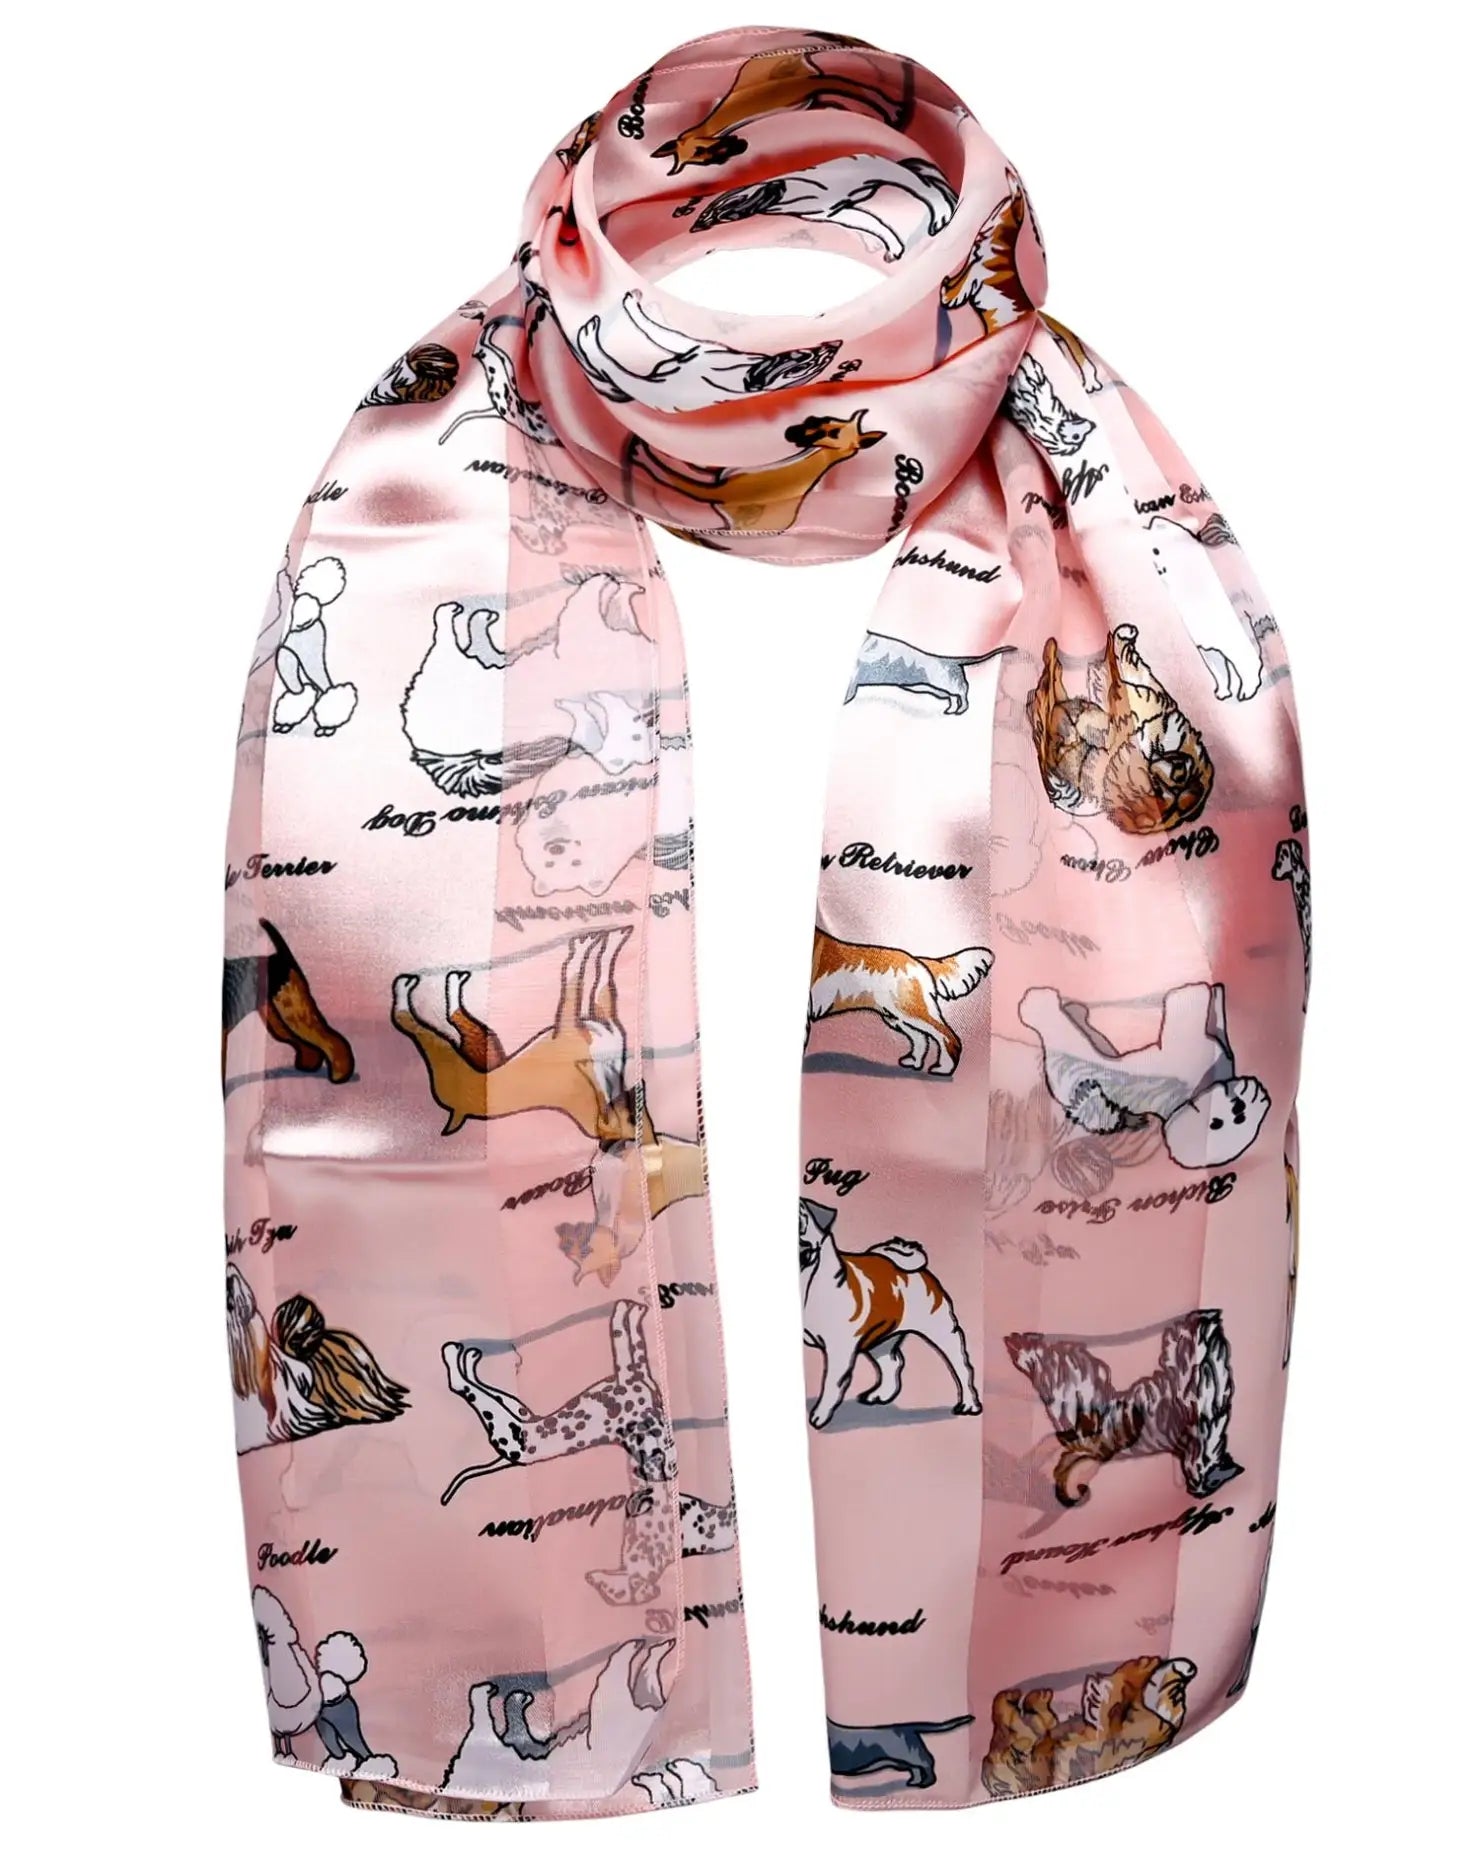 Pink scarf with cat pattern on Soft Satin Multi Dog Breed Print Unisex Scarf